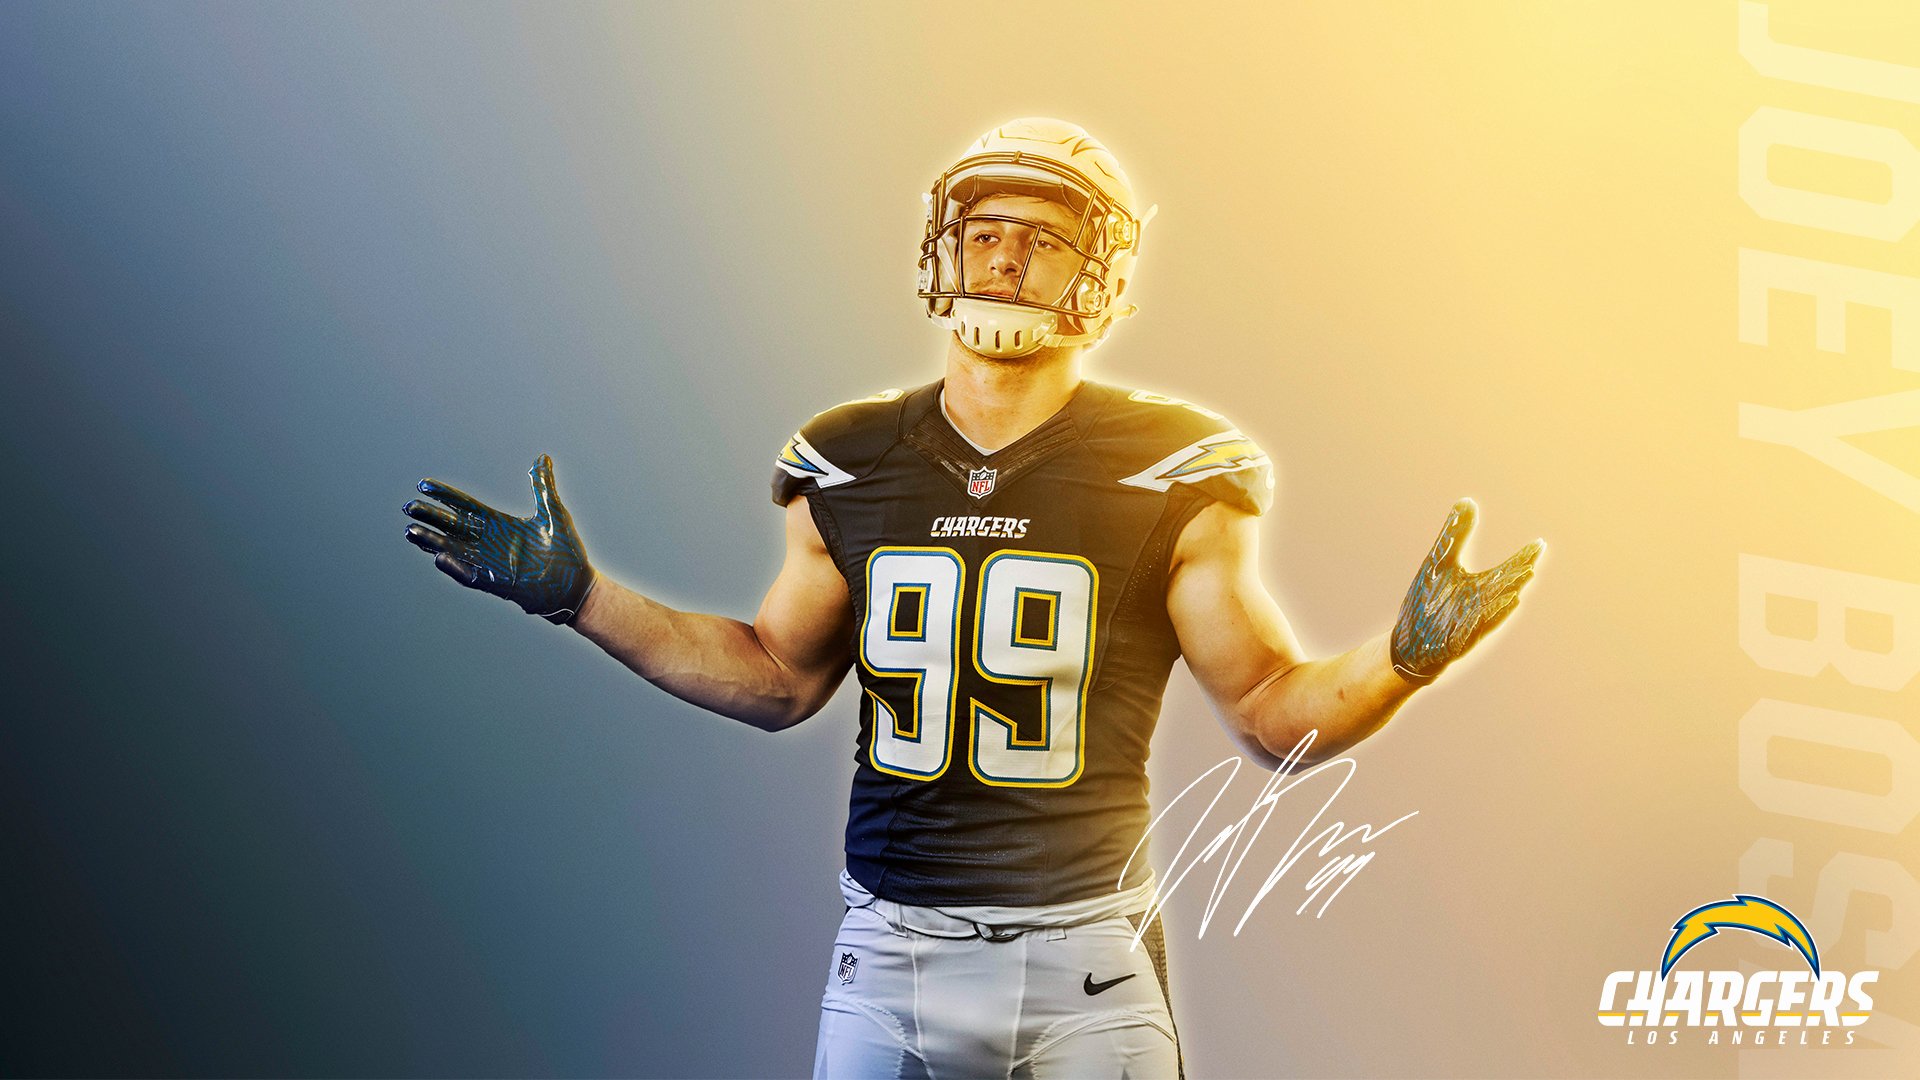 Chargers Wallpaper Luxury Los Angeles Chargers Wallpaper